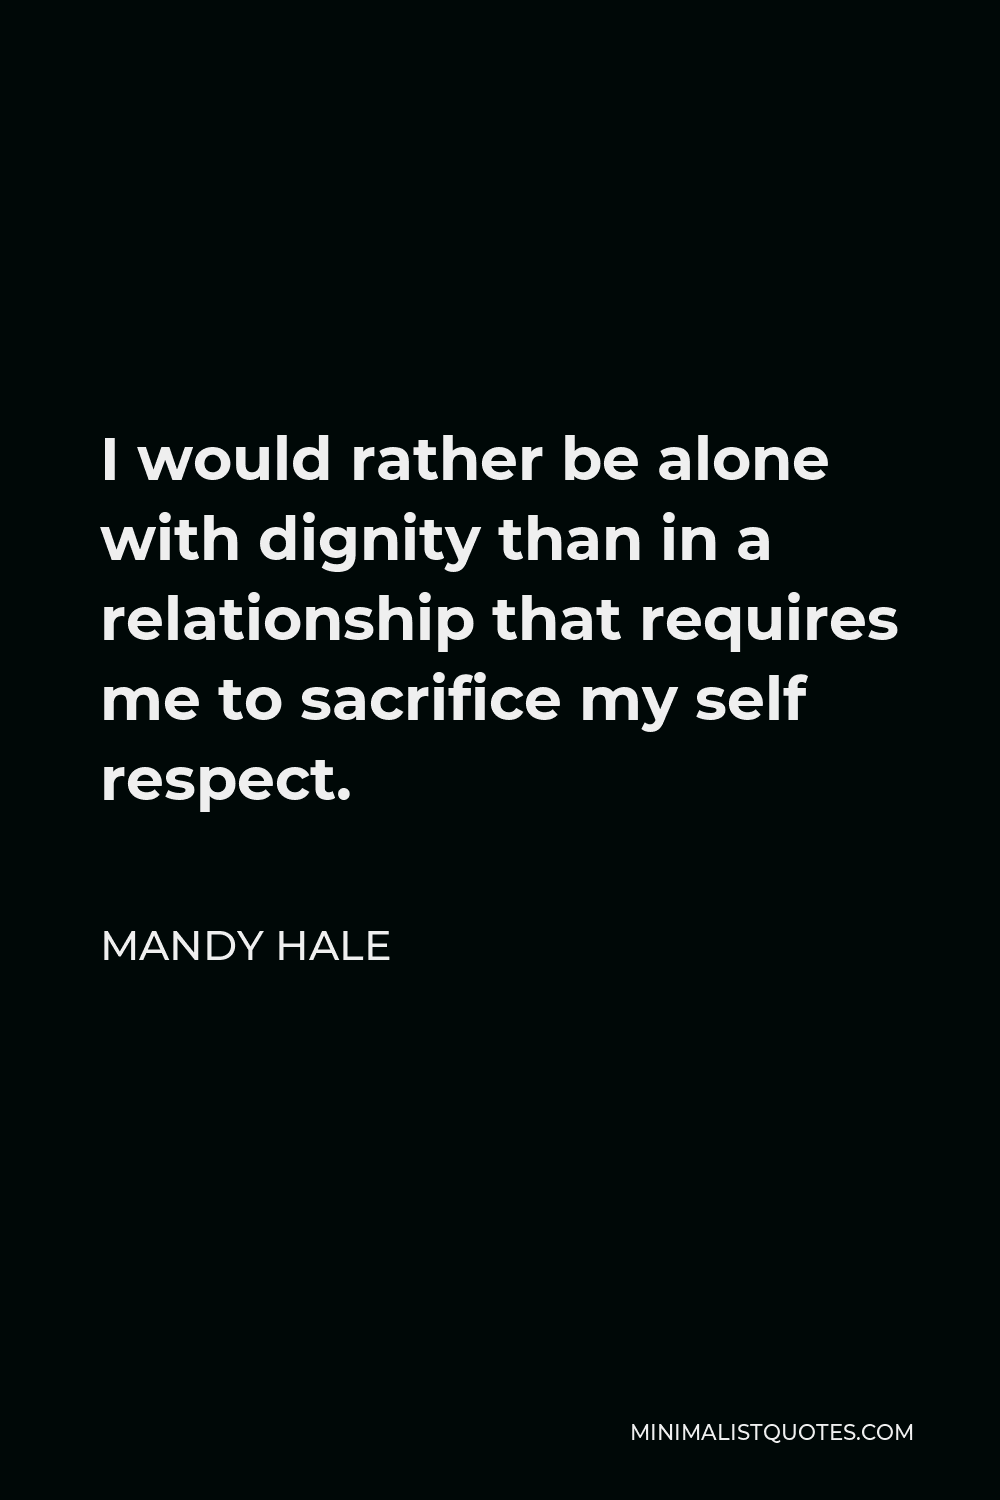 Mandy Hale Quote - I would rather be alone with dignity than in a relationship that requires me to sacrifice my self respect.